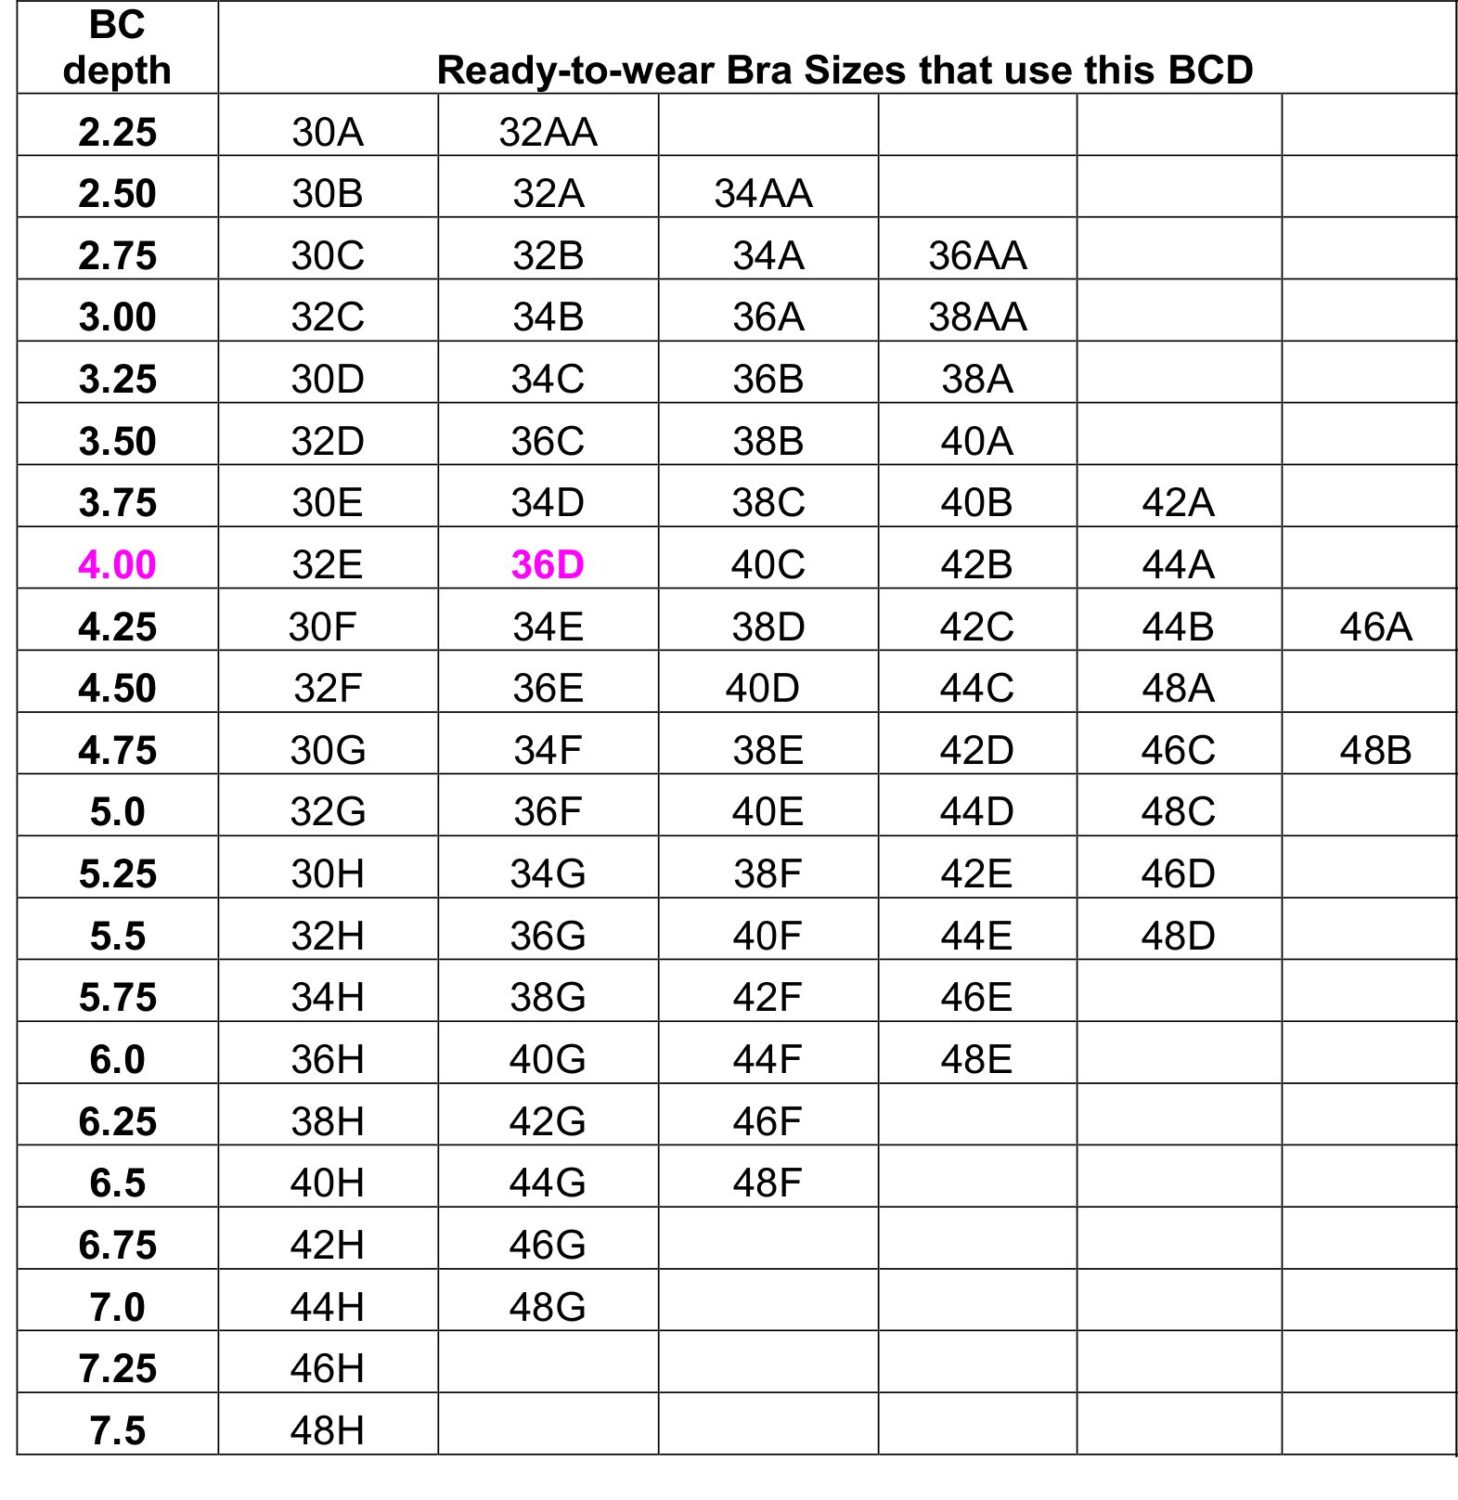 The BCD Method of Measuring Explained - Bra Pattern sizing made easy